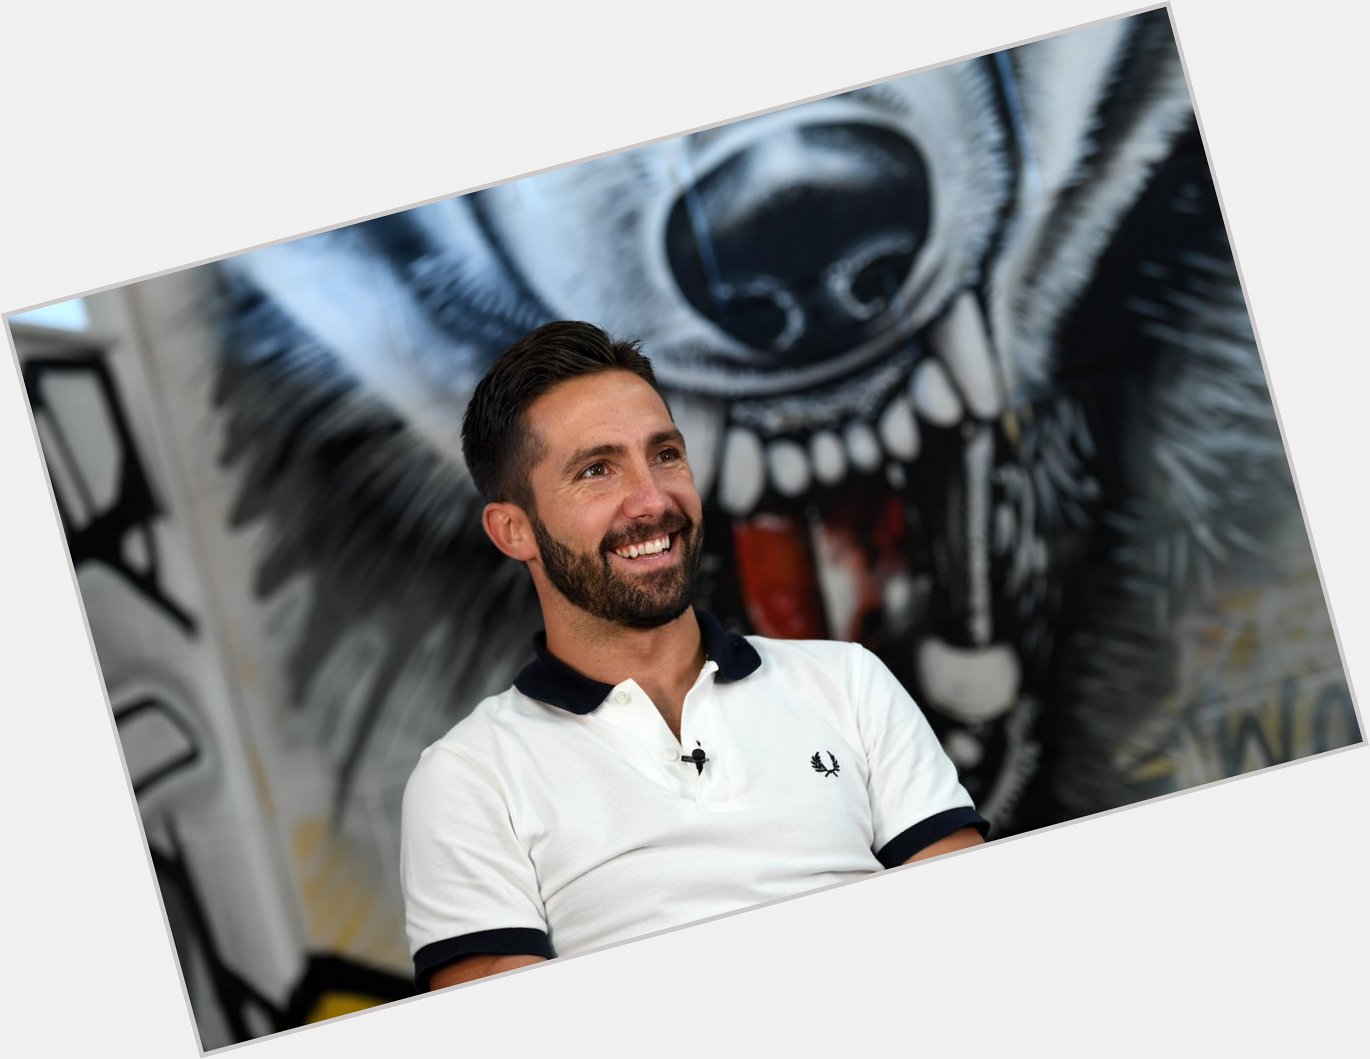 Happy birthday to Wolves midfielder Joao Moutinho who turns 32 today. Have a great day,   